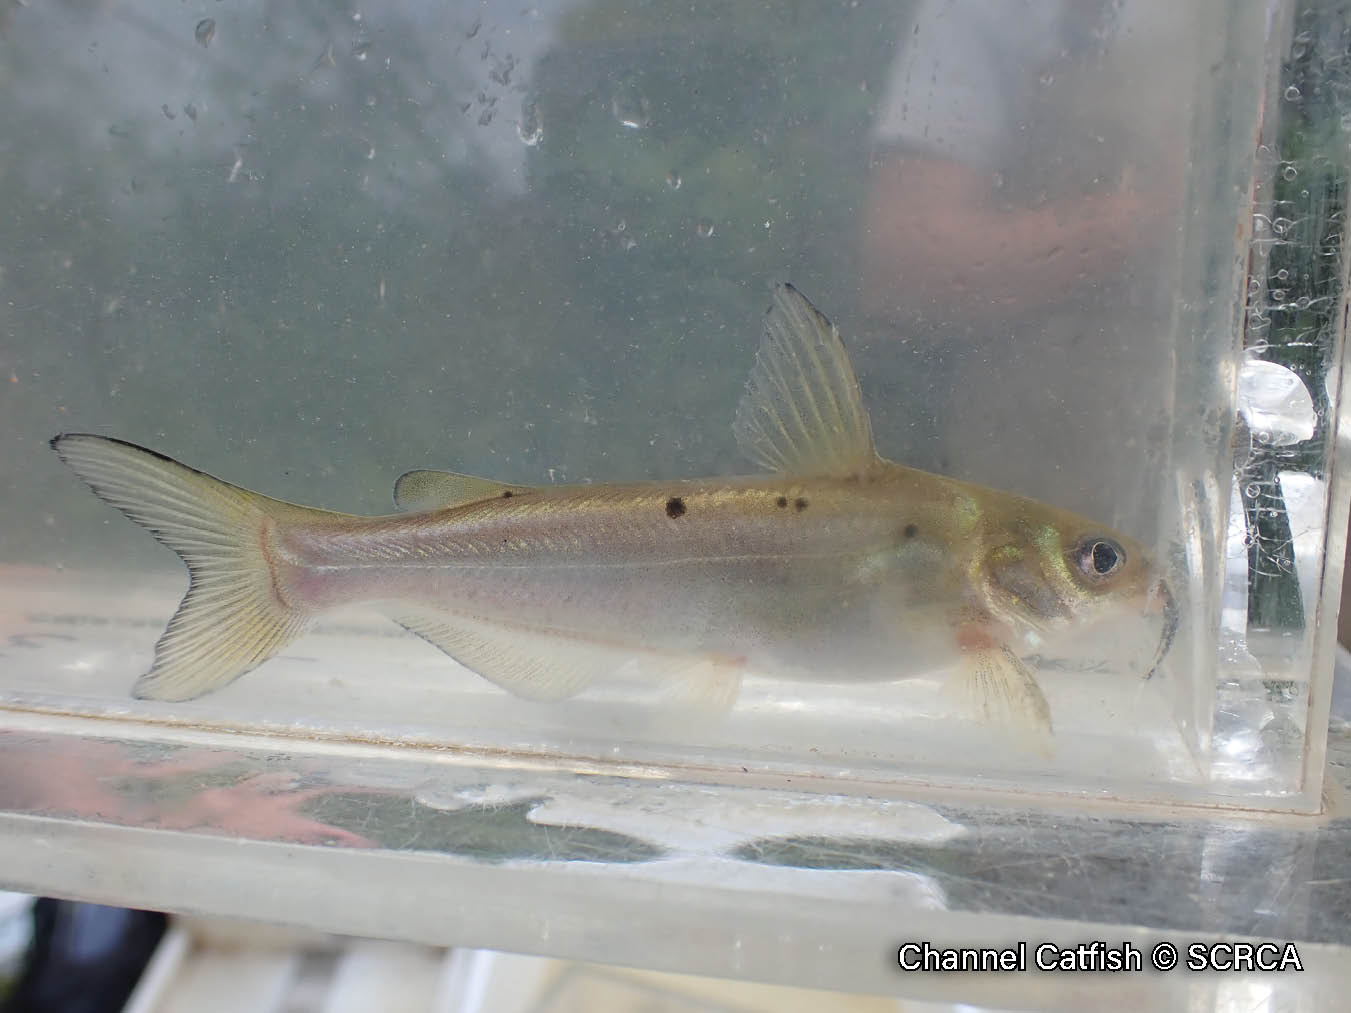 Picture of a young channel catfish in a viewing box, a silvery catfish with some black spots.